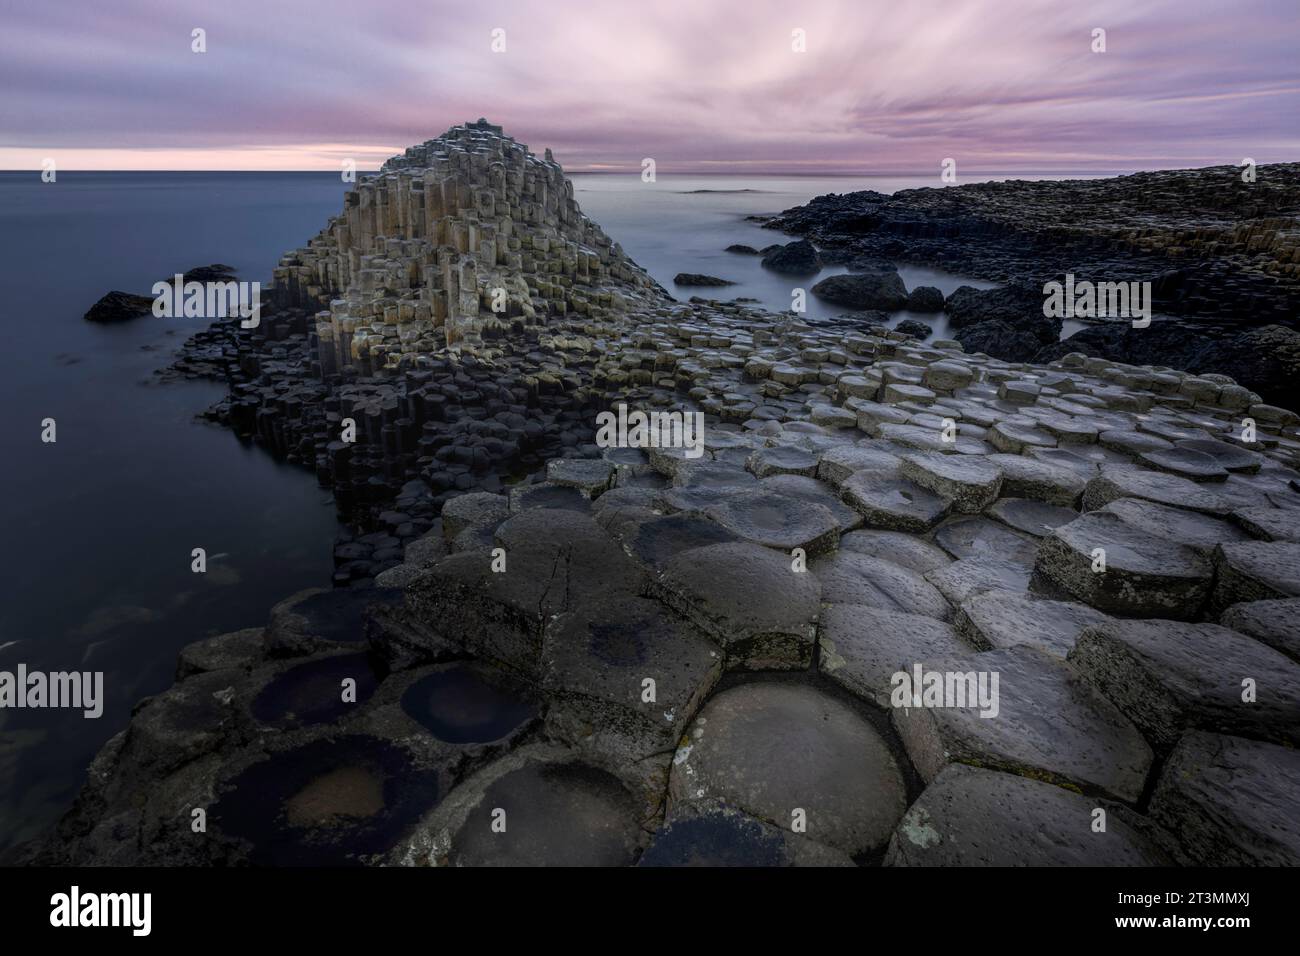 The Giant's Causeway is a UNESCO World Heritage Site located on the coast of Northern Ireland. It is a geological wonder consisting of over 40,000 int Stock Photo